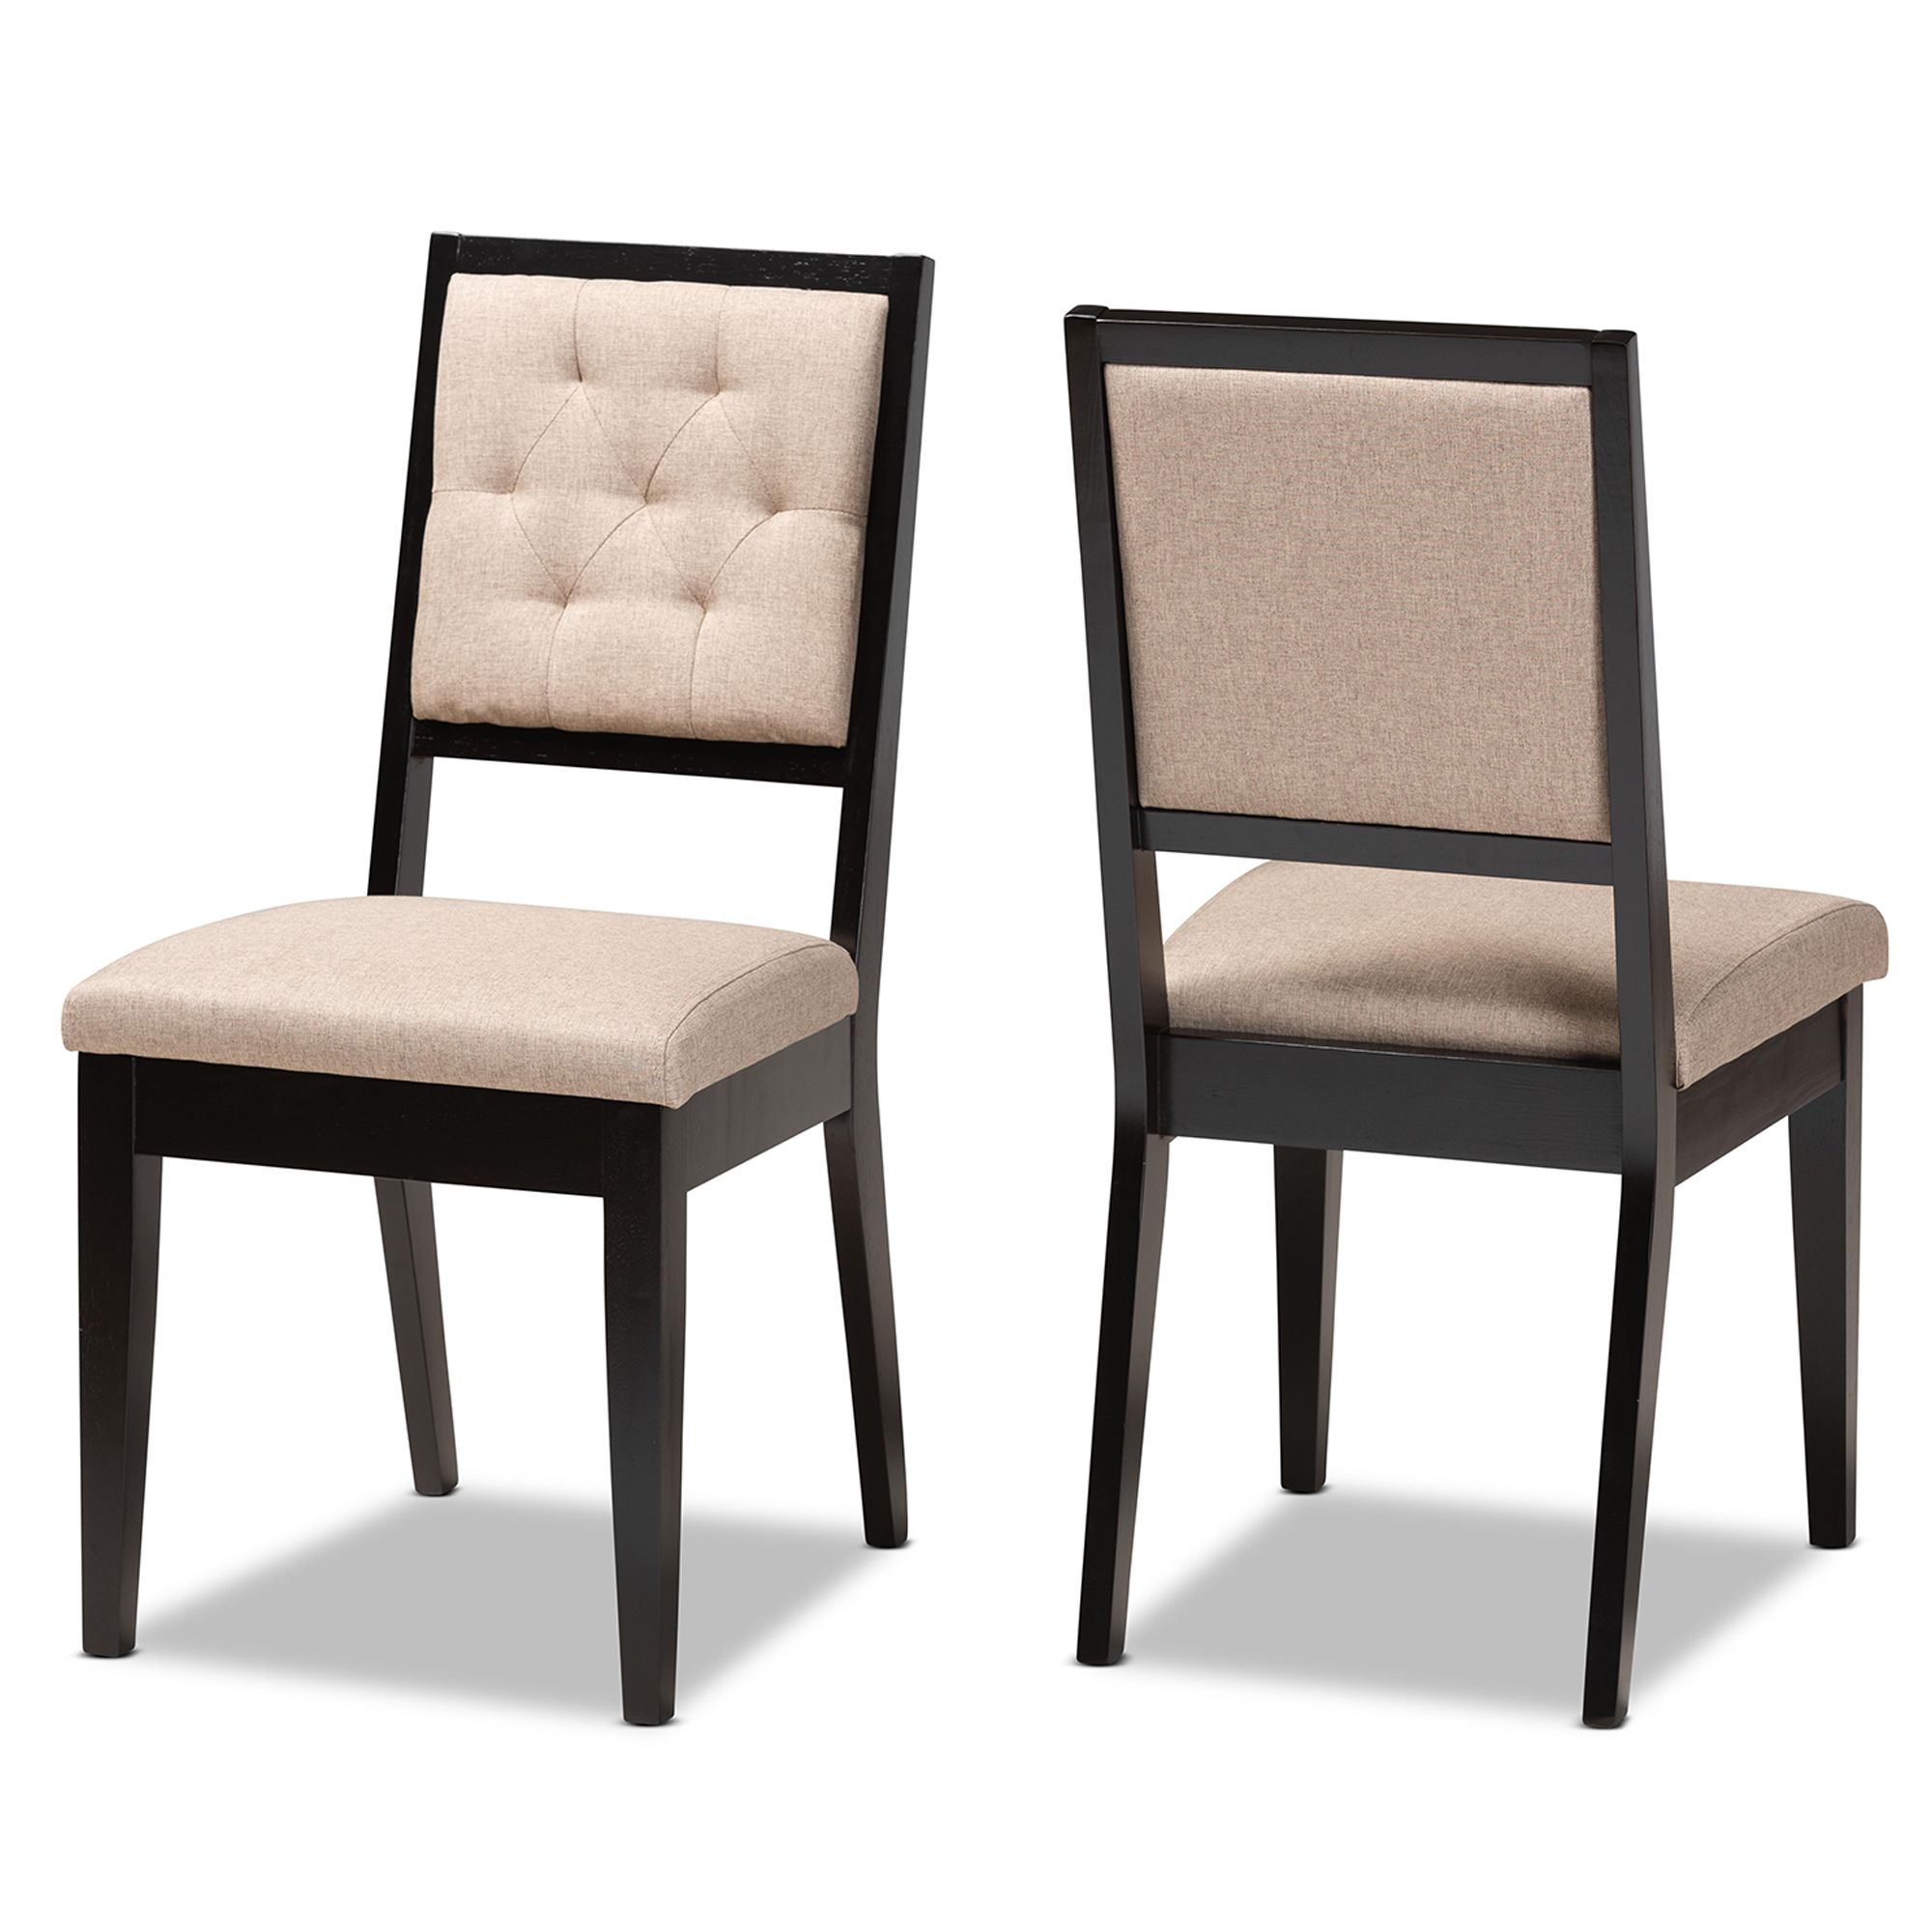 Set of 2 Louane Faux Leather Upholstered and Wood Dining Chairs Beige/Black  - Baxton Studio